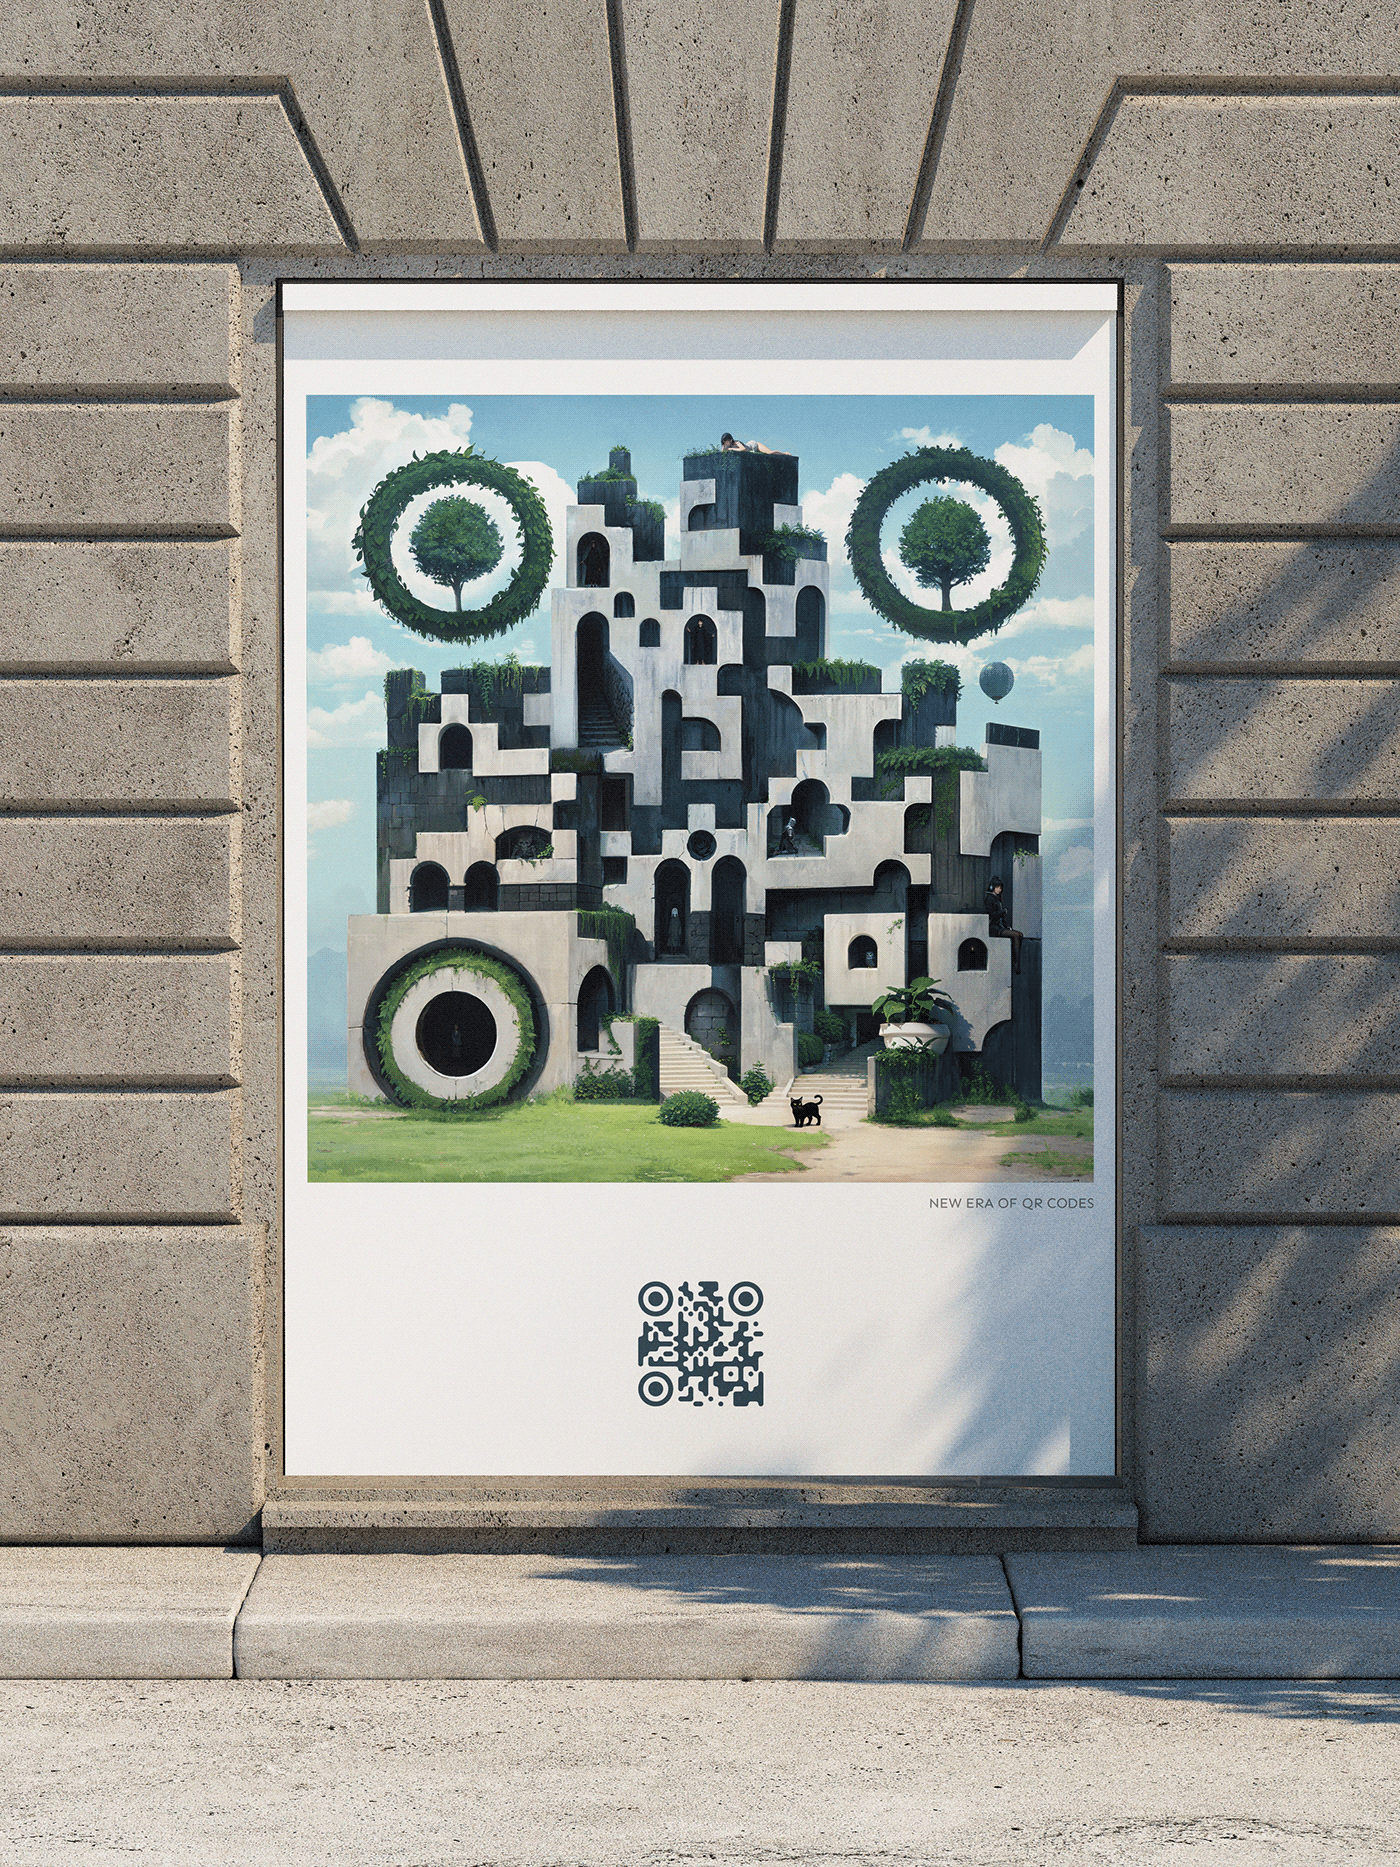 Promo poster on a building wall featuring an image of a futuristic structure which is actual QR code